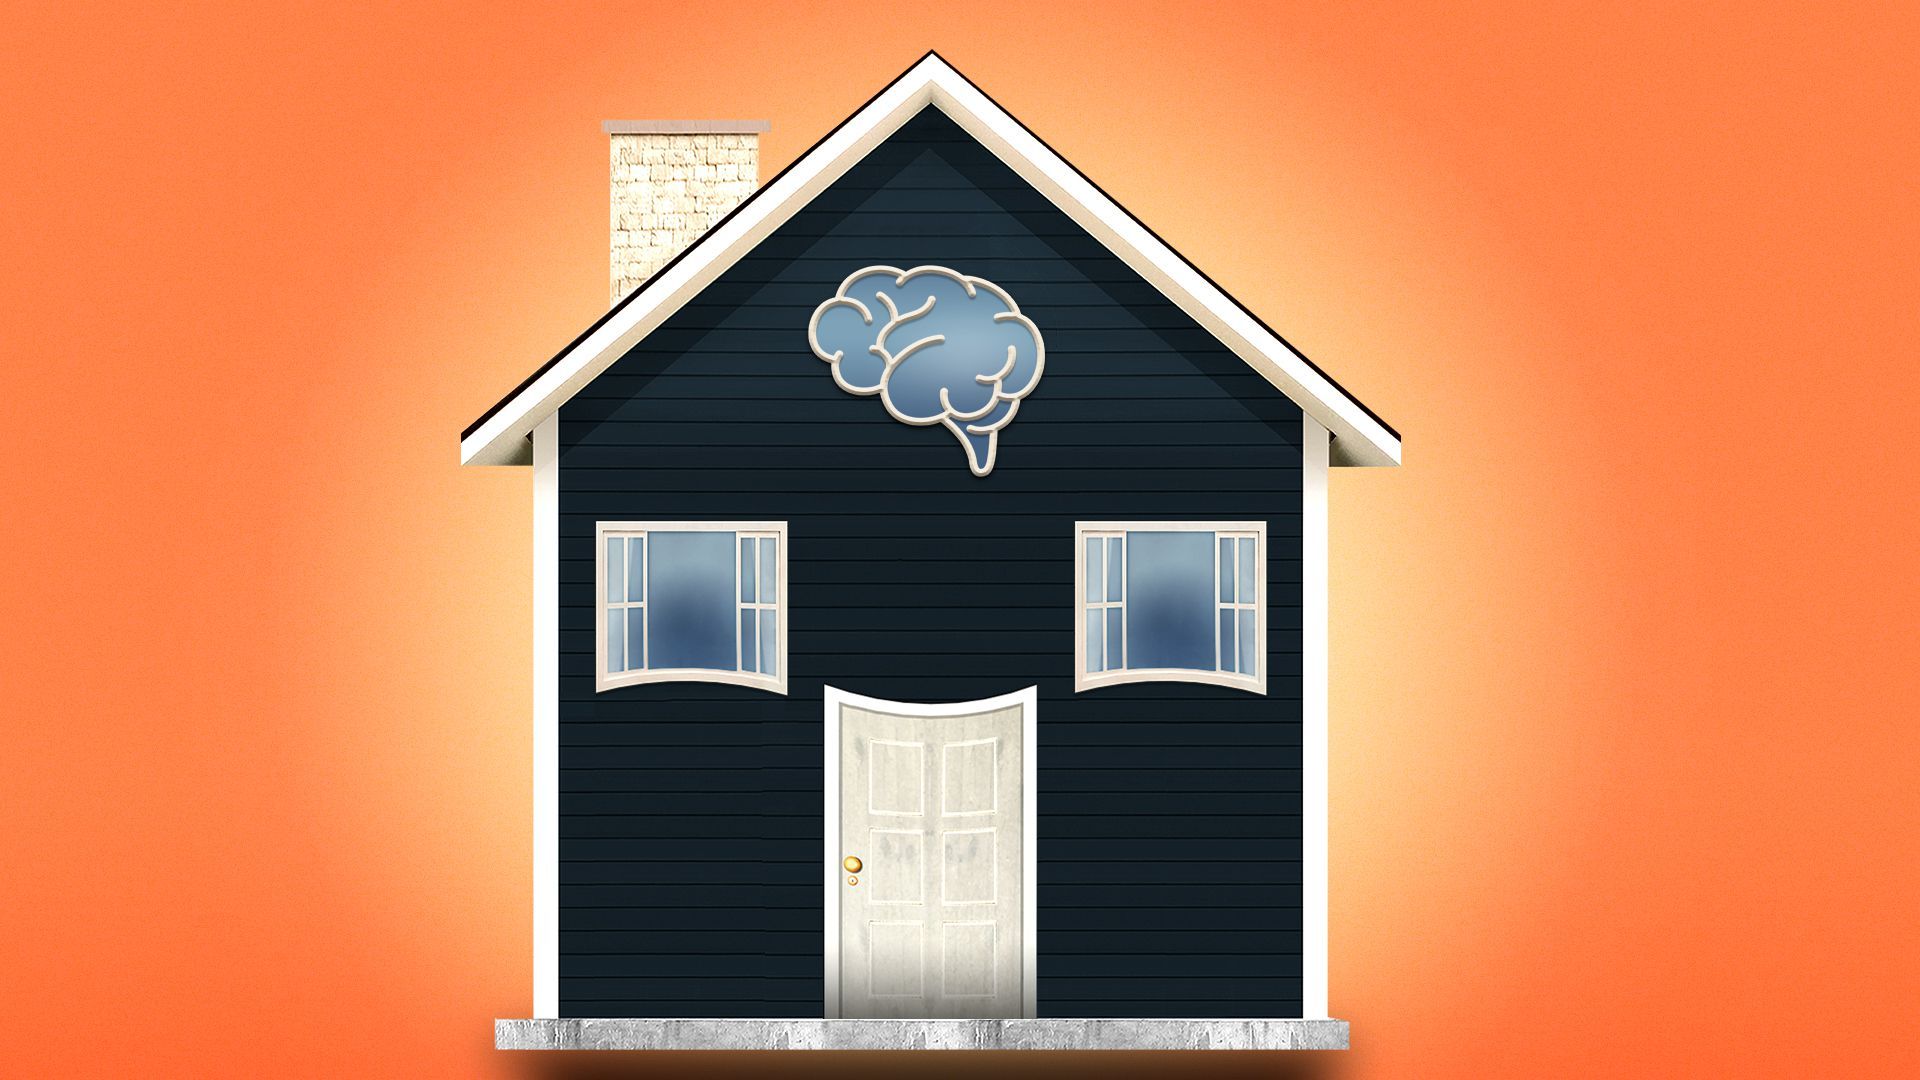 Illustration of a house with windows and a door that resemble a smiling face and a third window above resembling a brain